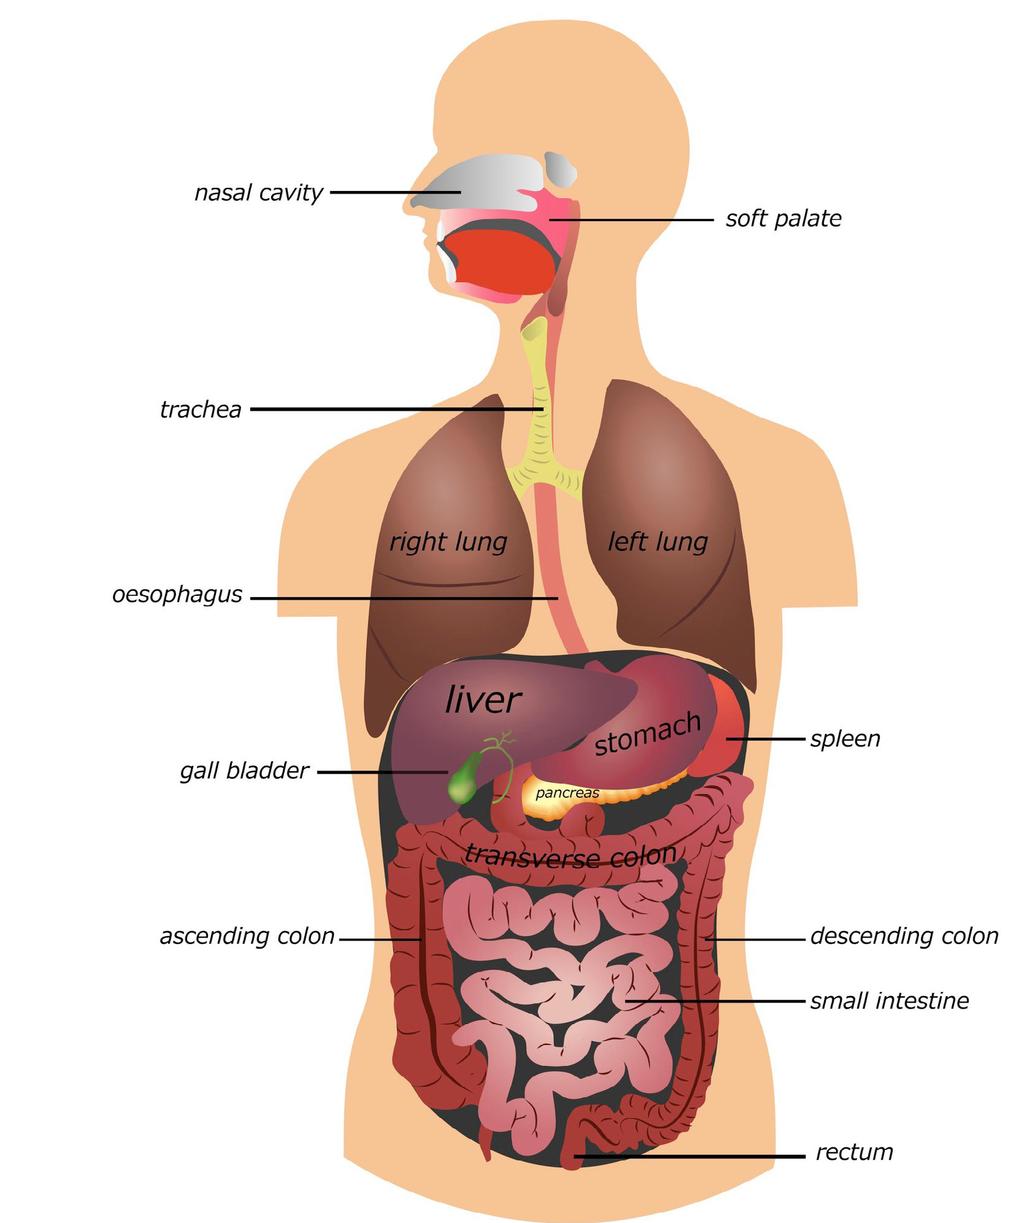 13.3 Digestive system The task of the digestive system is the physical and chemical breakdown of food.